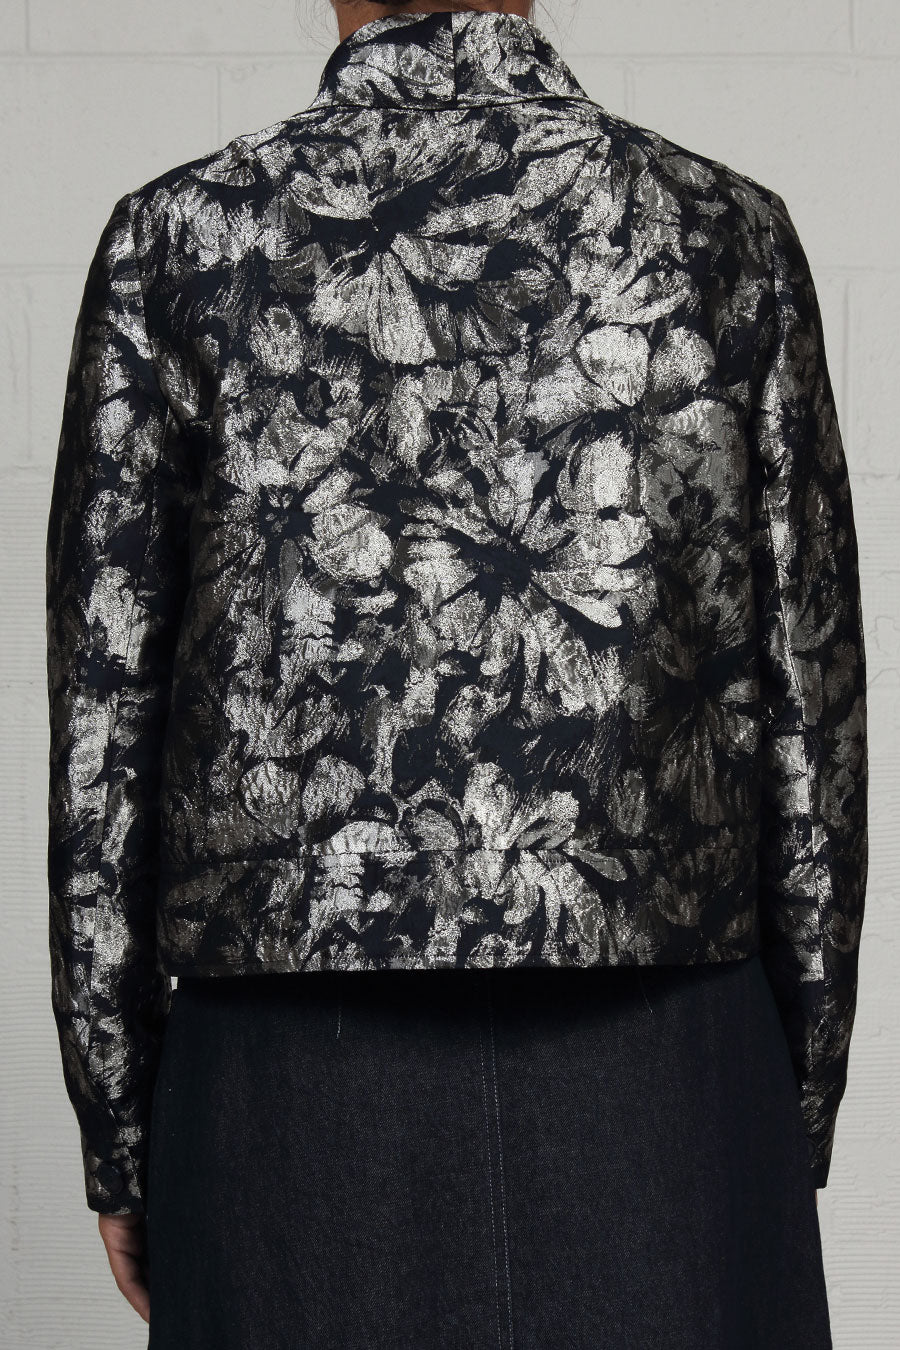 'Metallic' Floral Jacquard Squall Jacket - xlg last one!